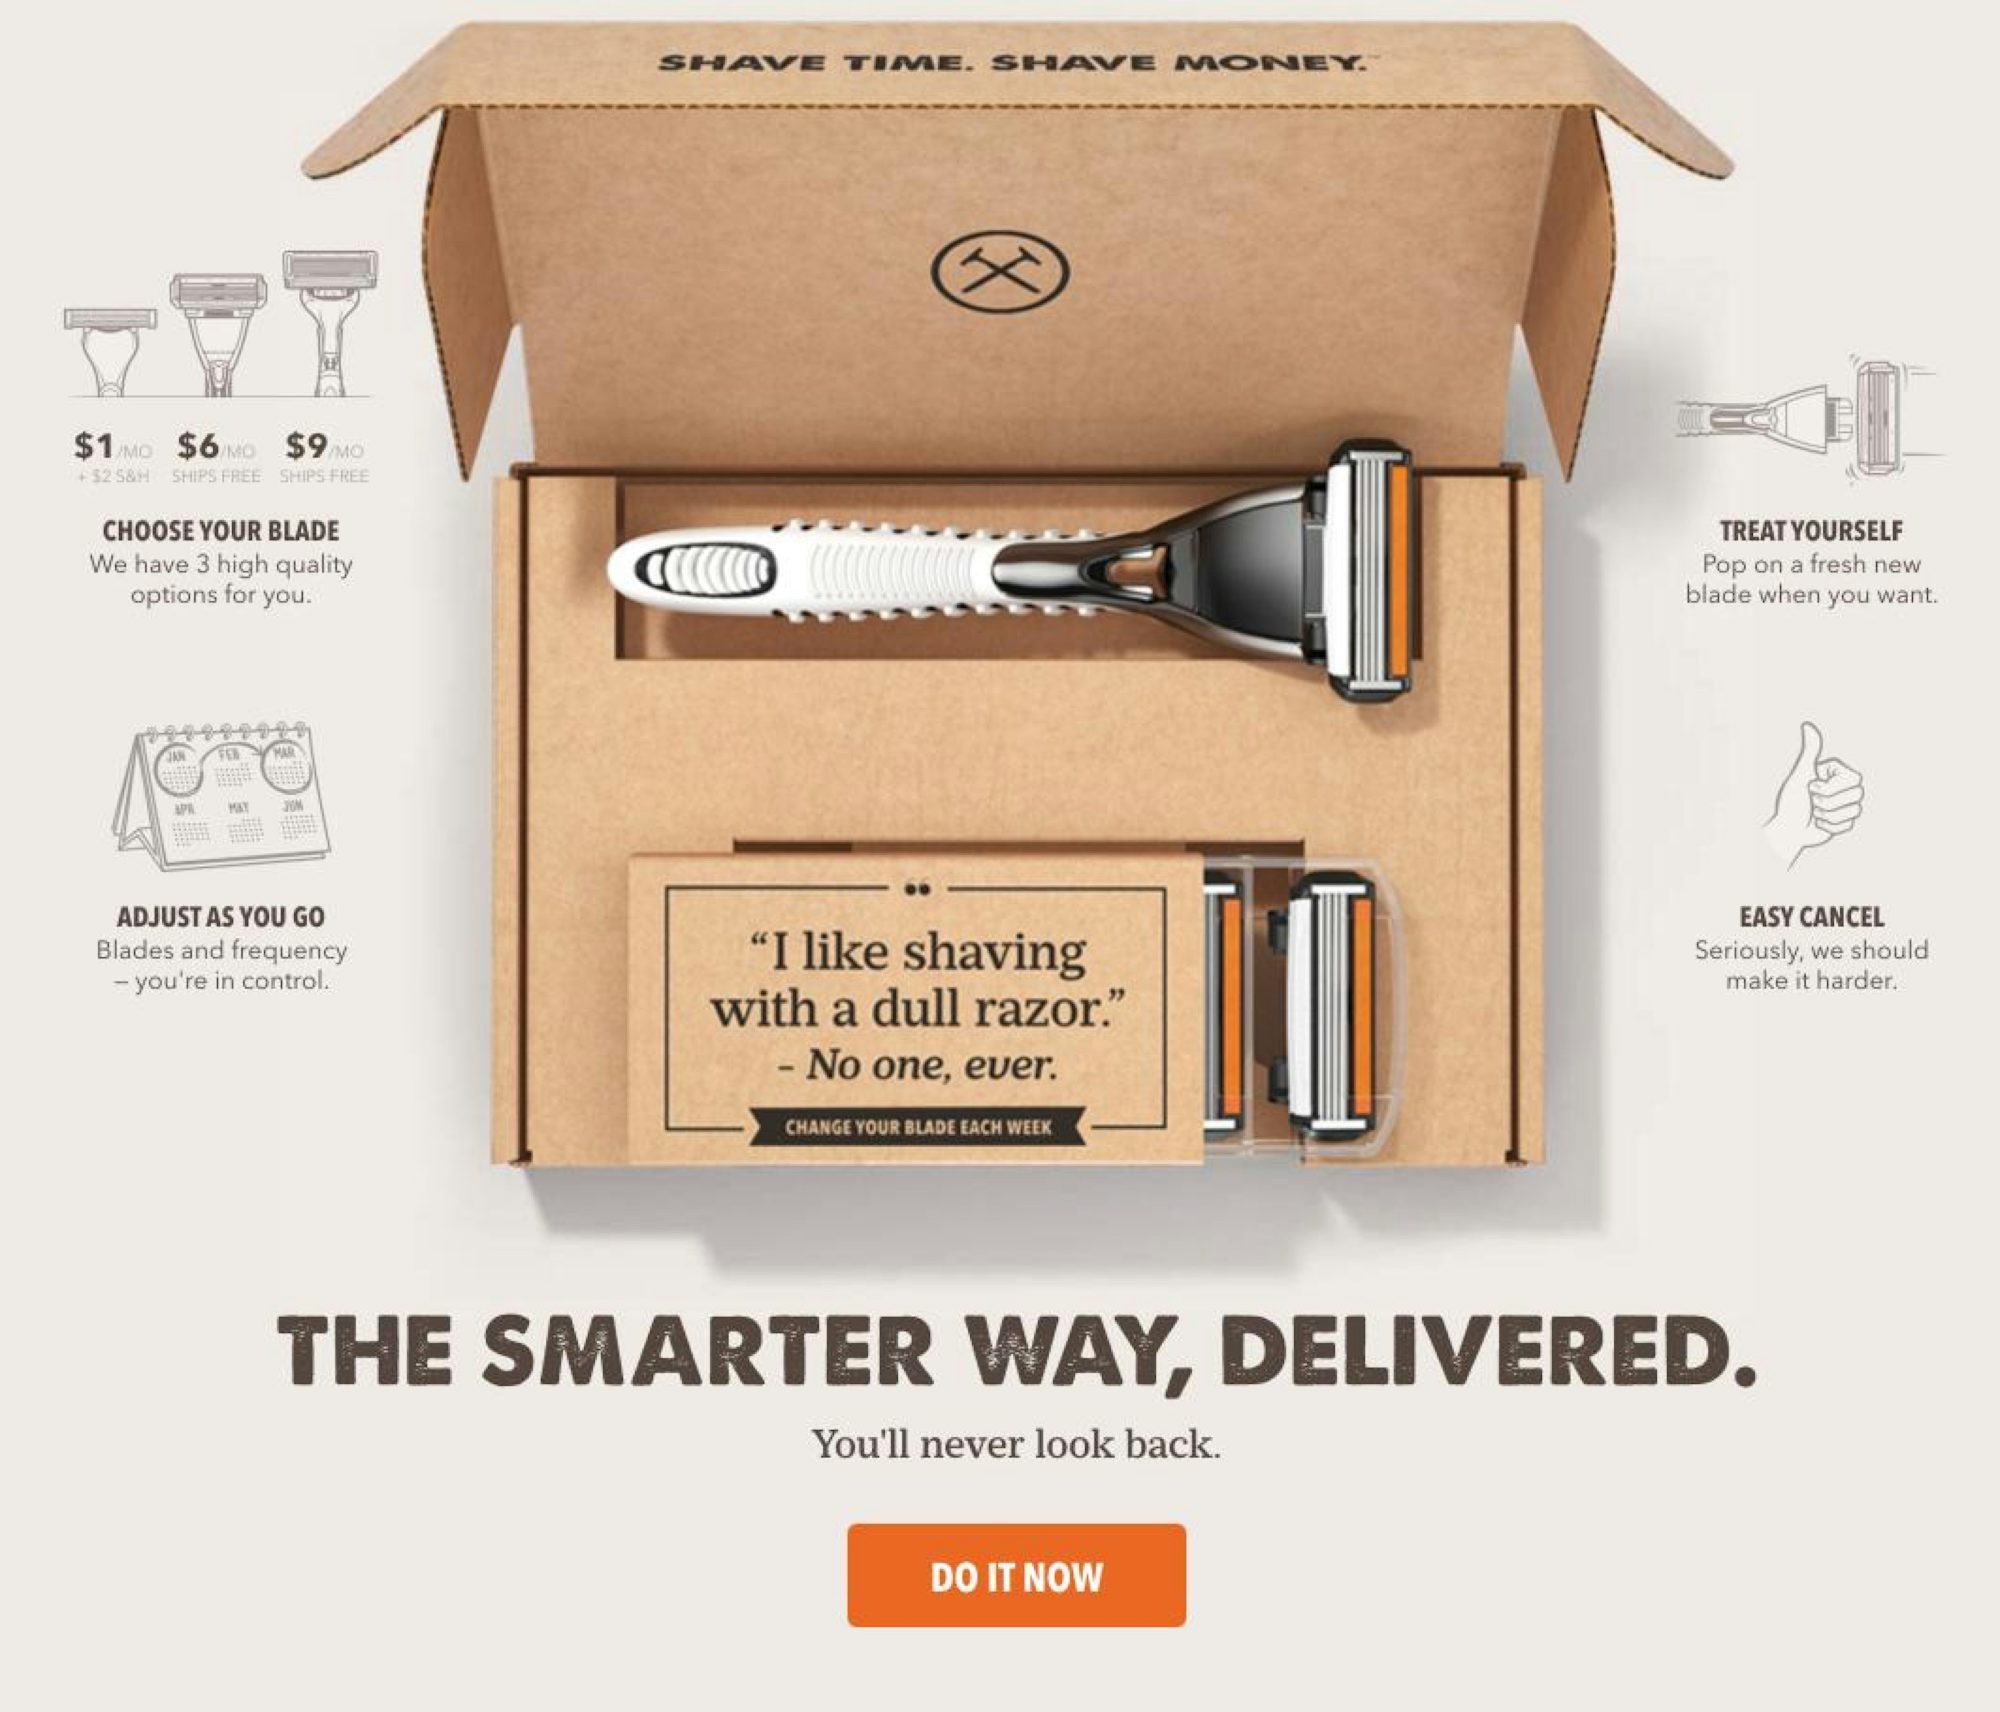 Dollar Shave Club packages and features